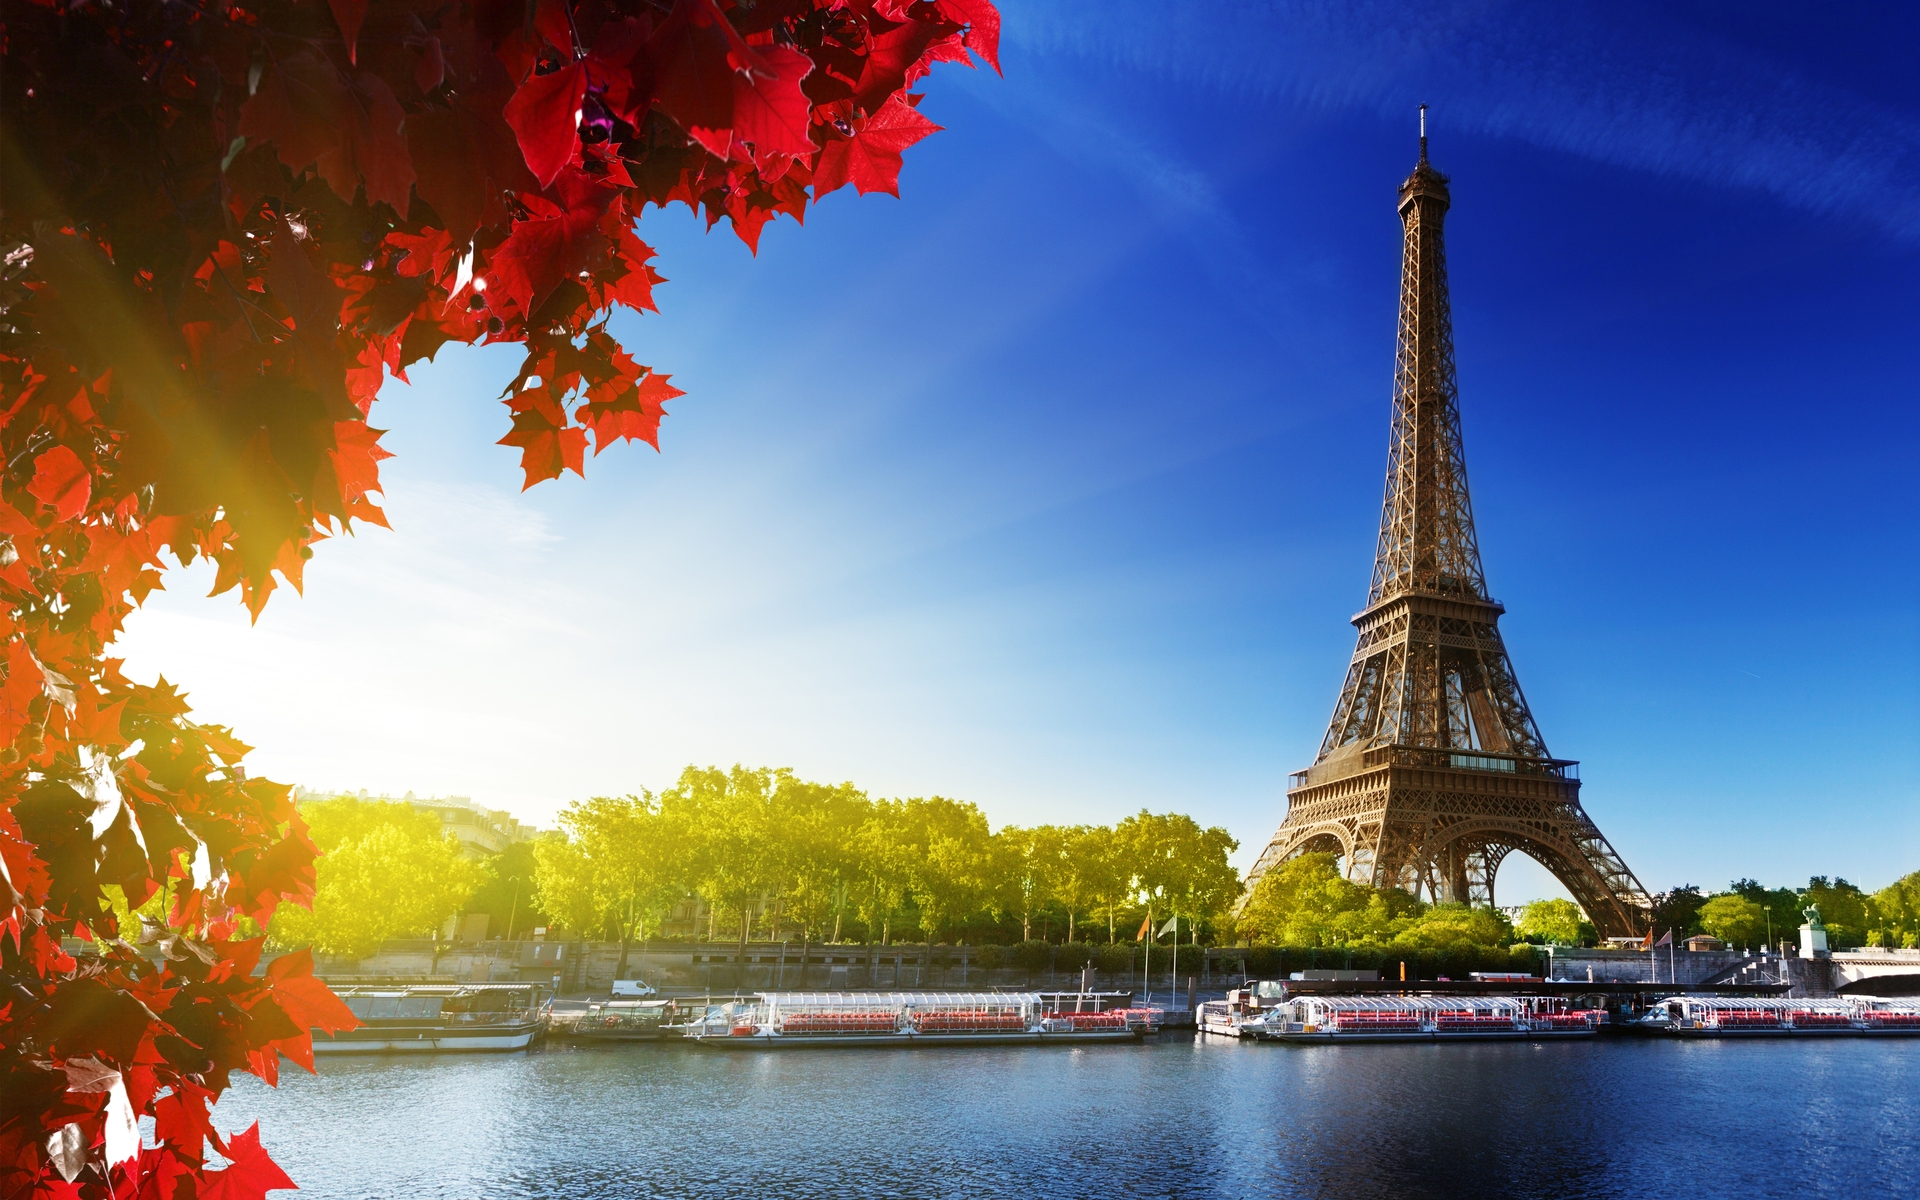 france, man made, eiffel tower, city, monument, paris, scenic, monuments download HD wallpaper